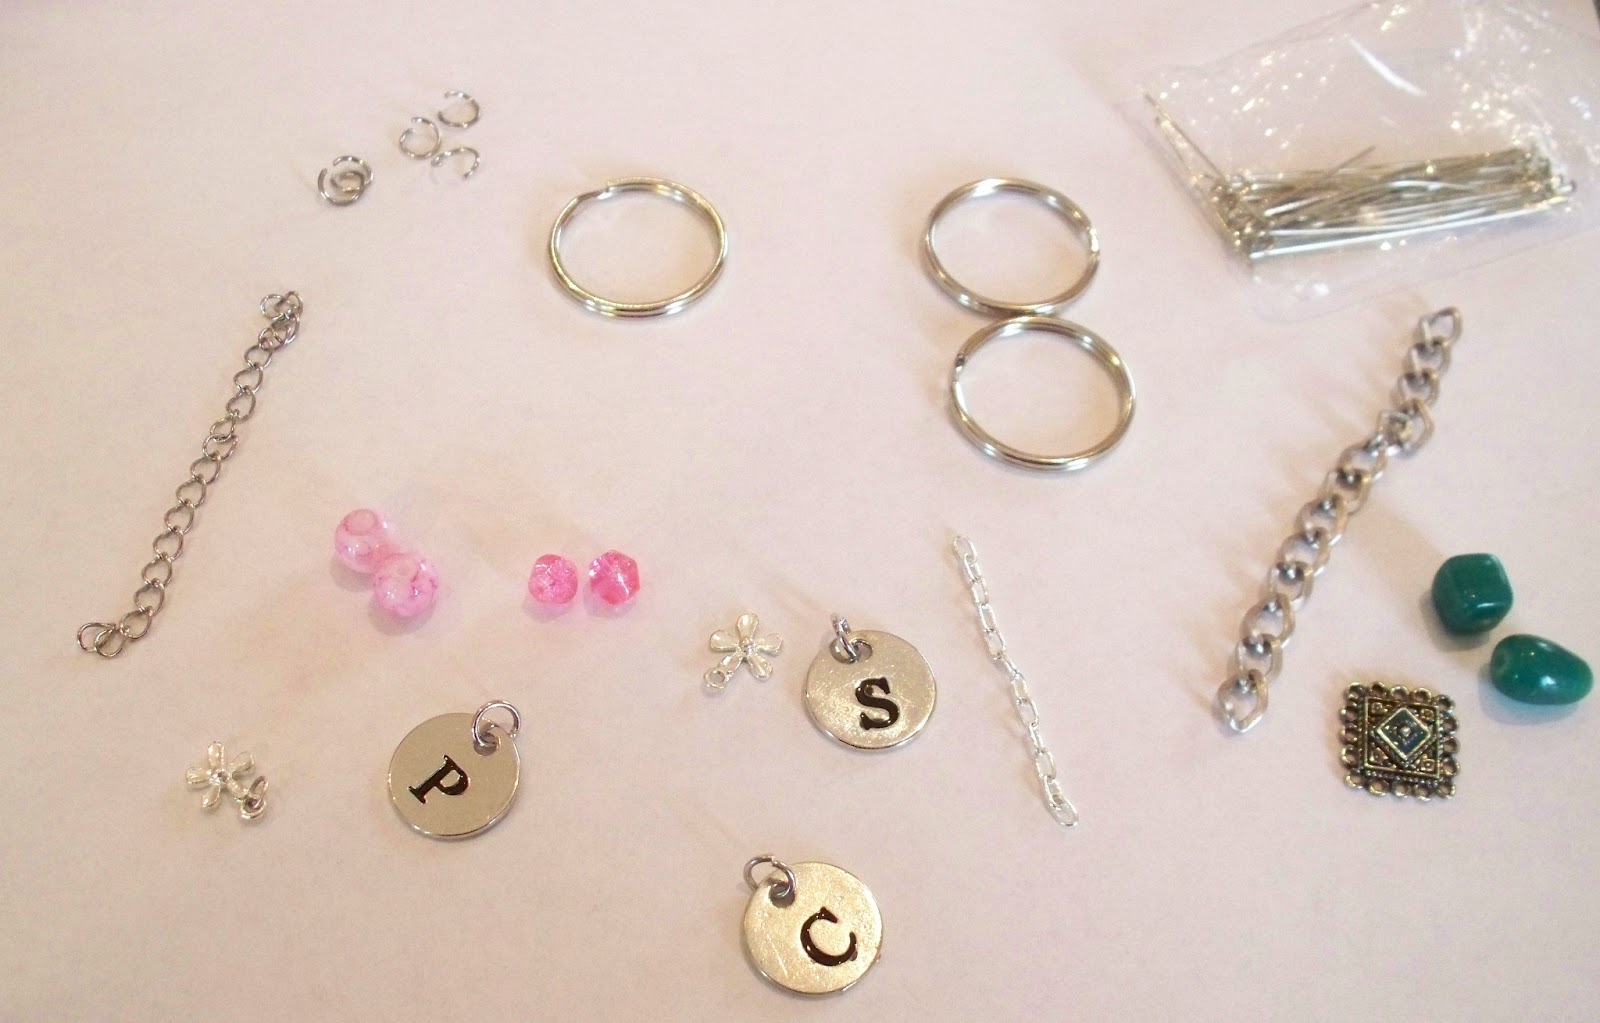 How to Make Your Own Keychains - Adventures of a DIY Mom